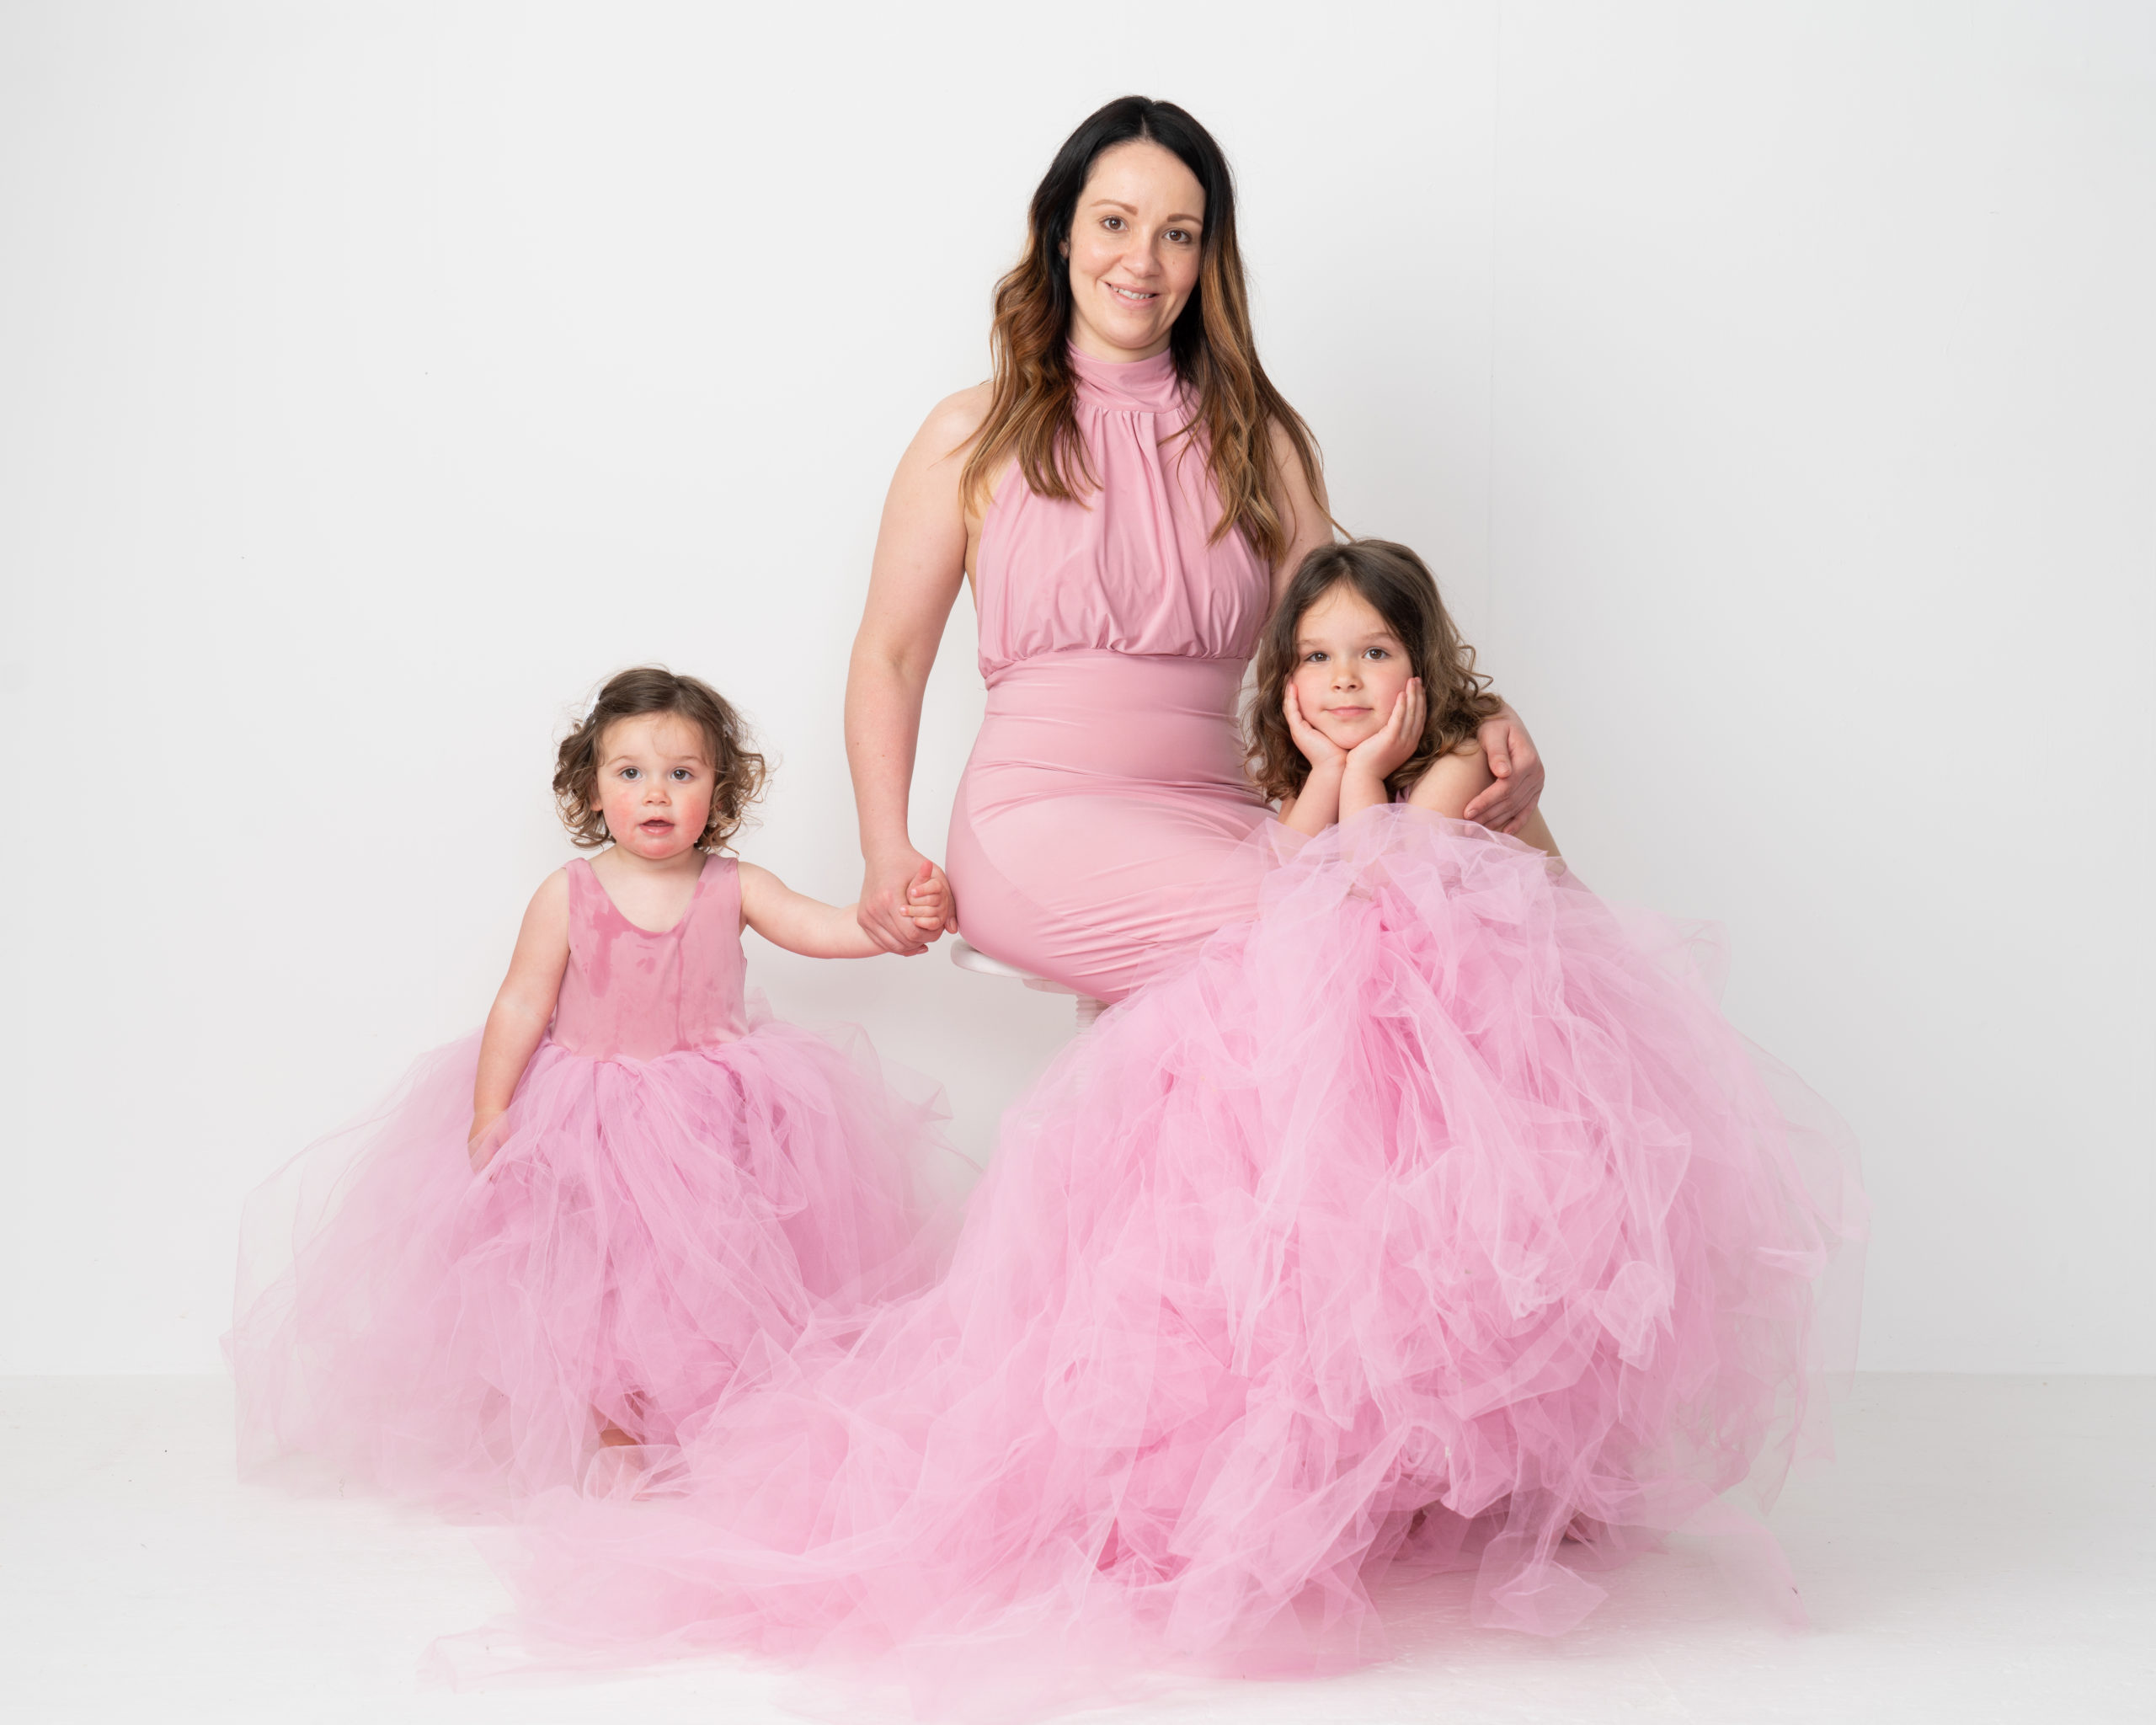 mum and daughters in pink dresses in light photography studio by Family photographer in preston lancashire